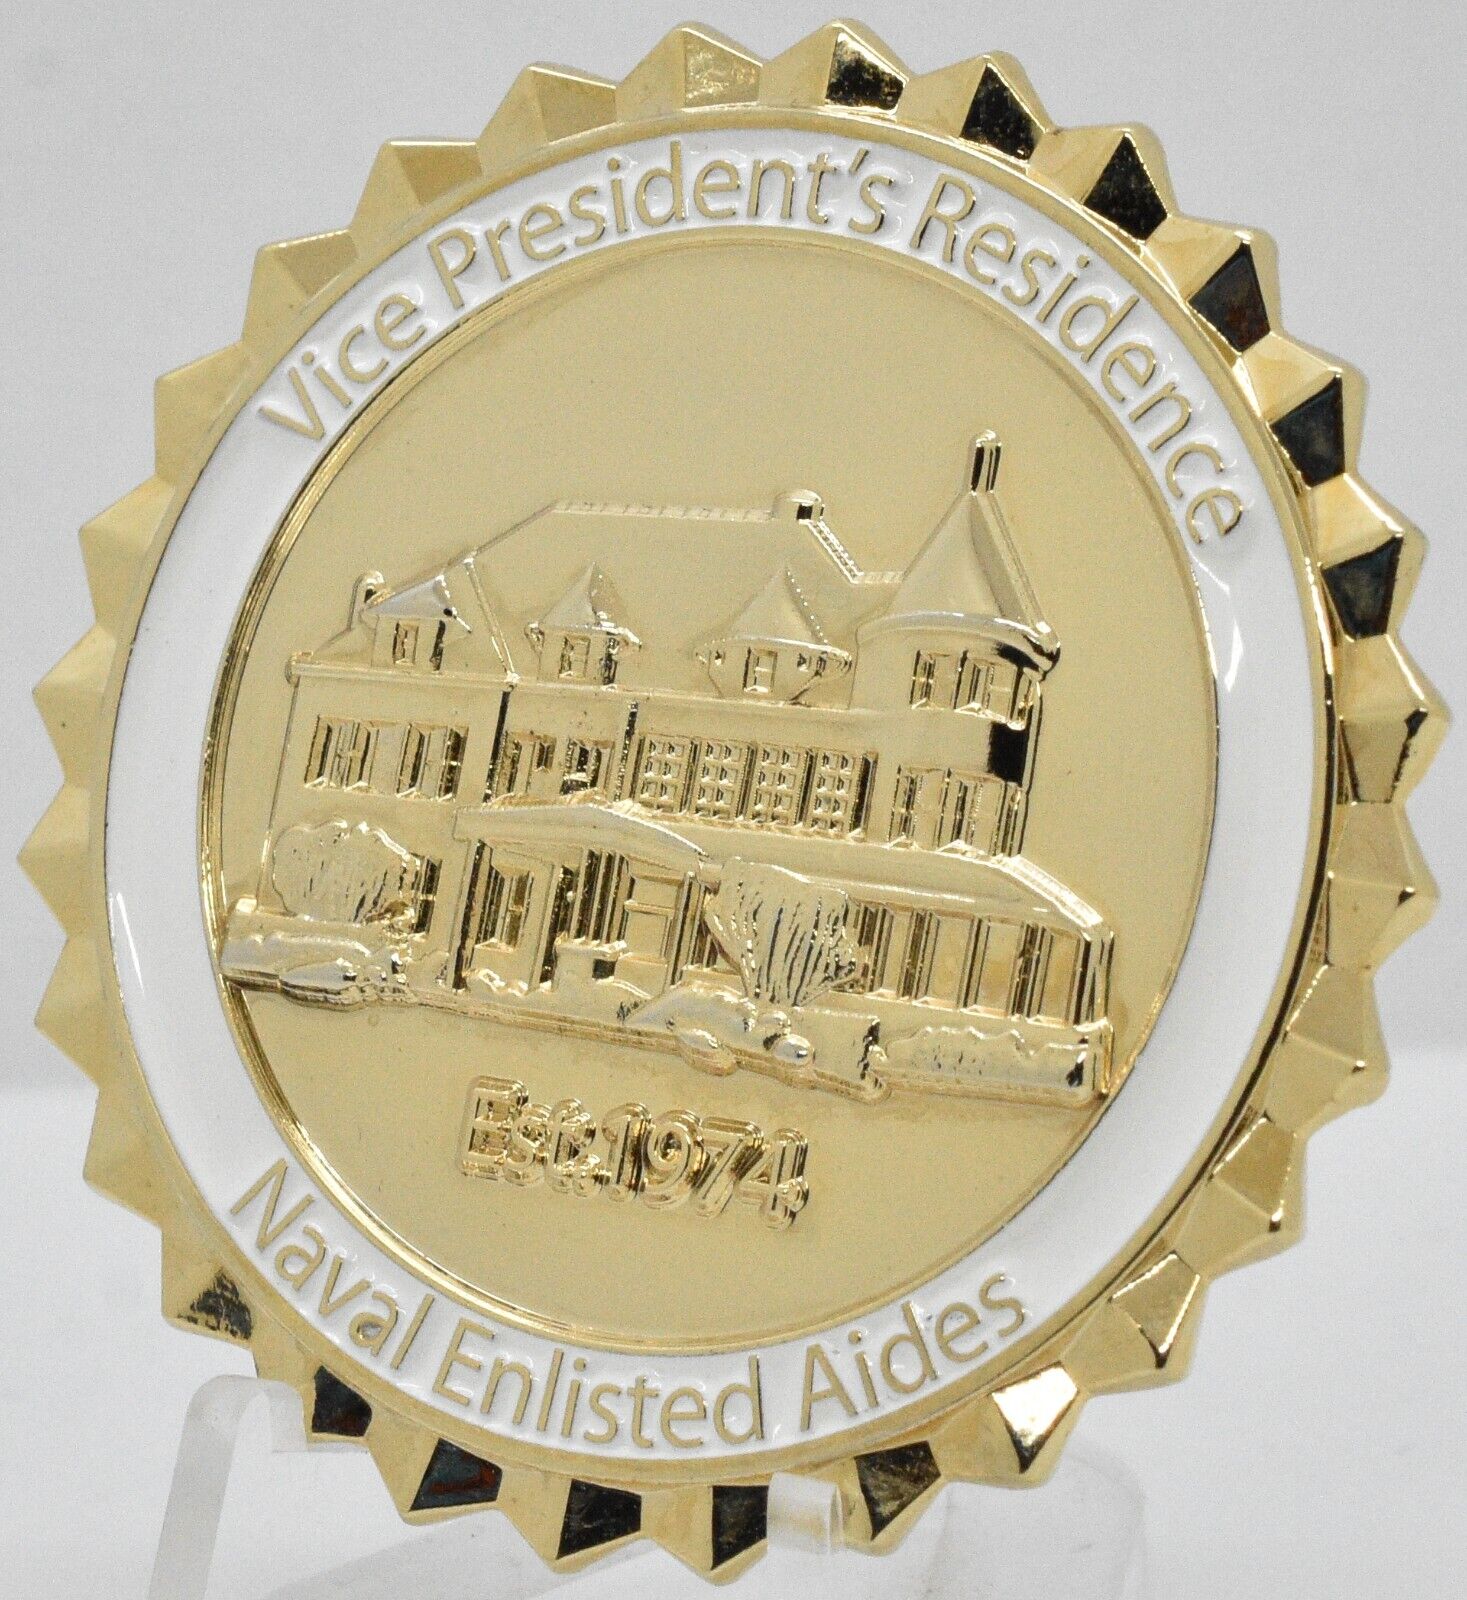 Vice President's Residence Naval Enlisted Aides Challenge Coin